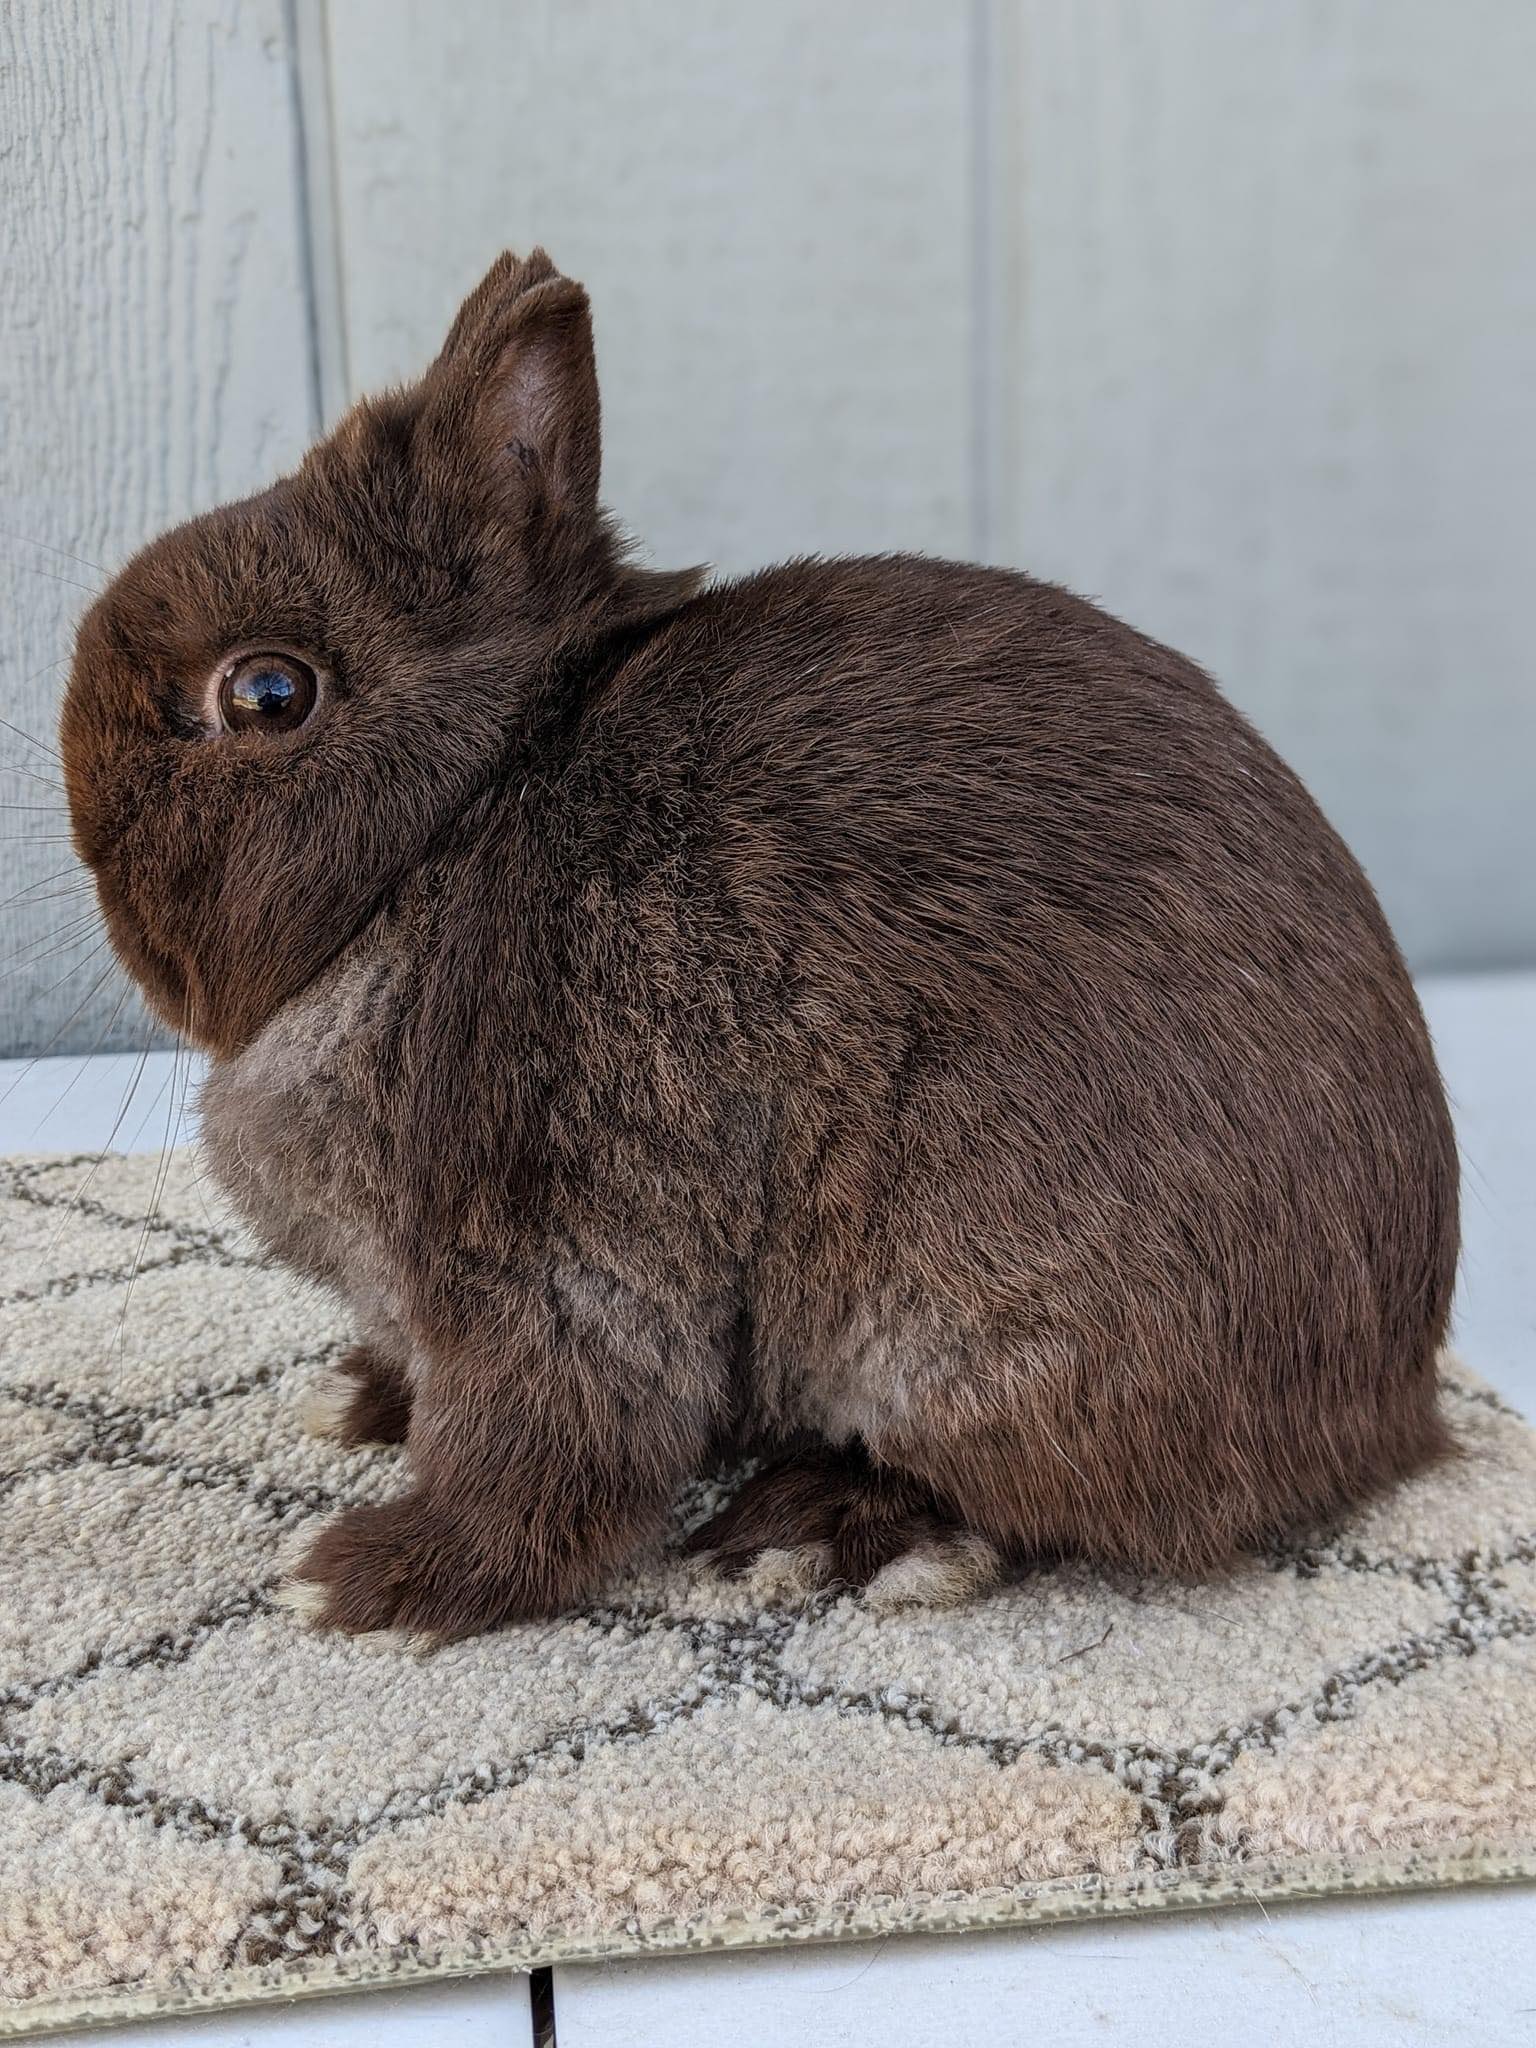 Tiny Treasures Await: Find Your Netherland Dwarf Rabbit for Sale